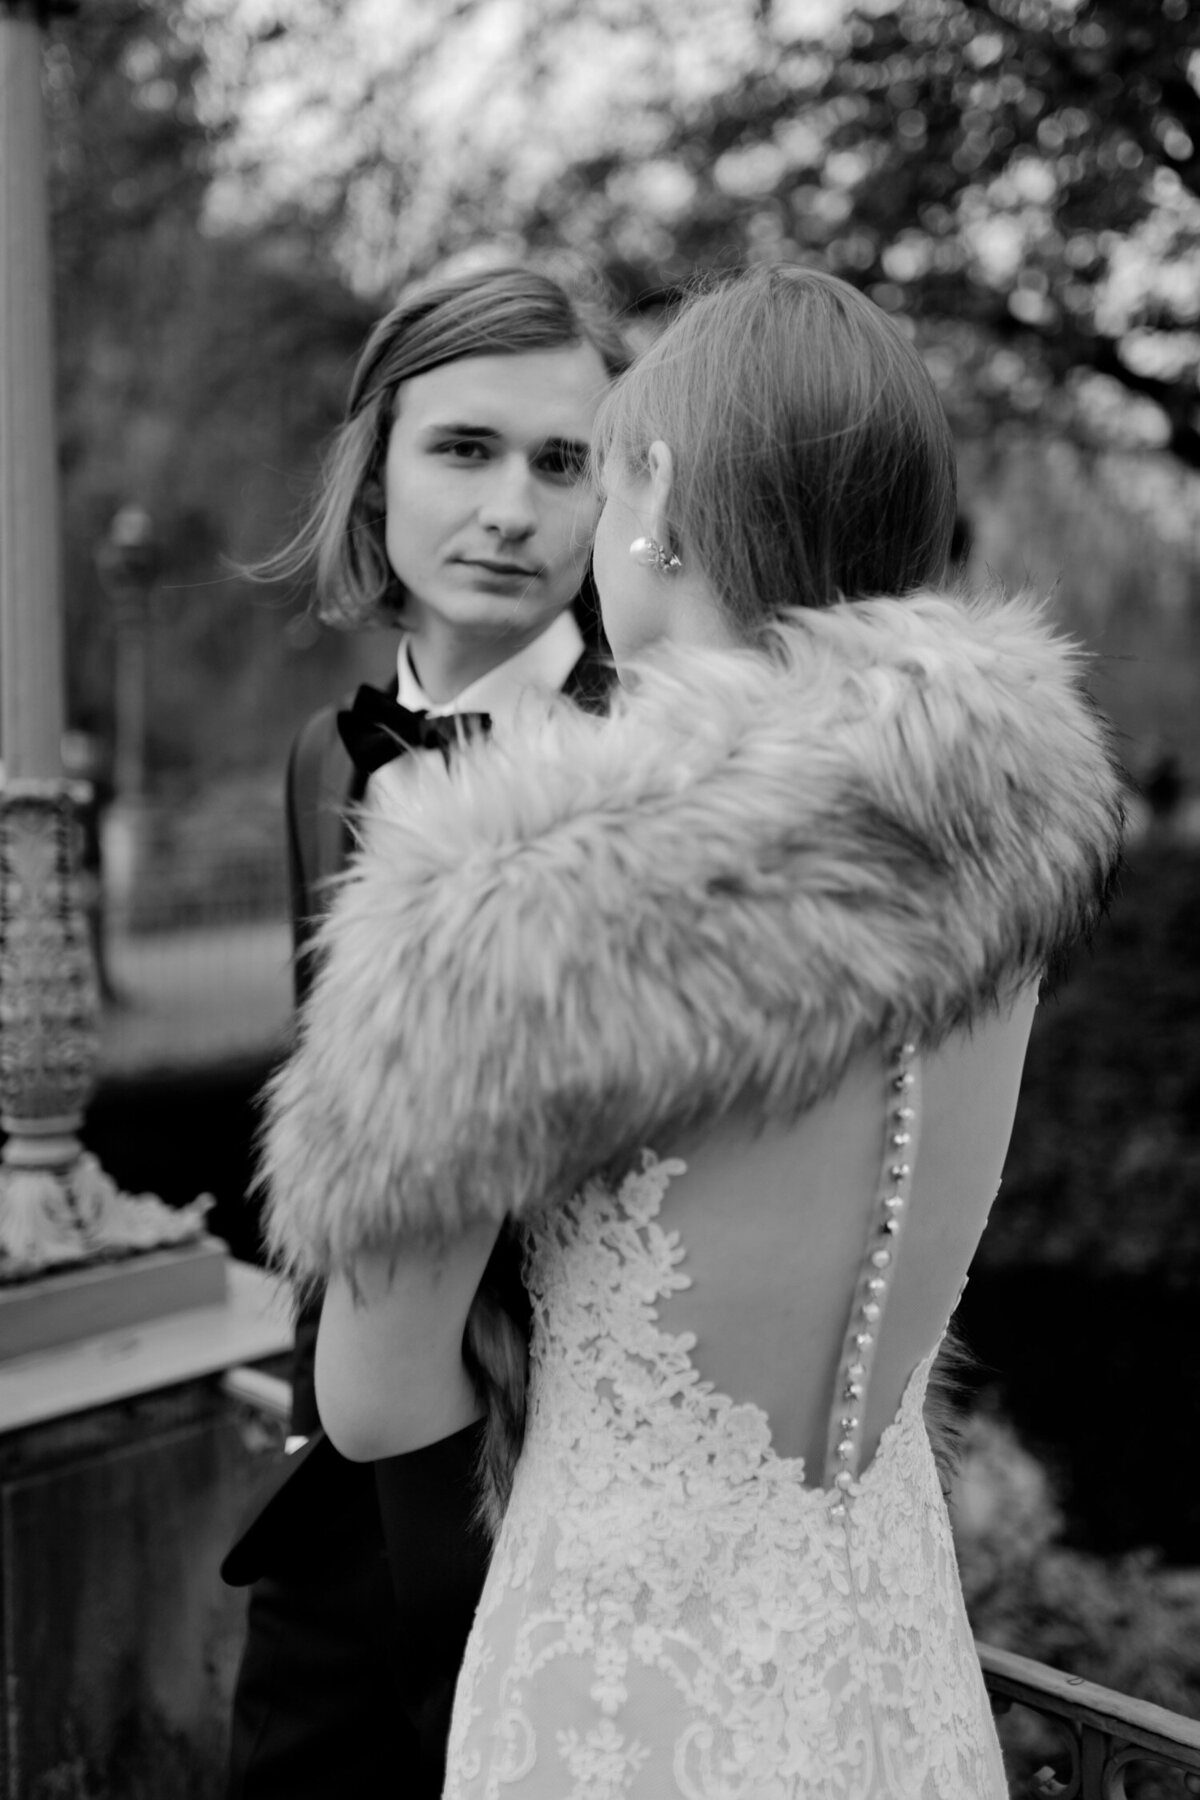 080_Flora_And_Grace_Europe_Fine_Art_Wedding_Photographer-236_A sophisticated fine art wedding in Europe with an editorial edge captured by Vogue wedding photographer Flora and Grace.